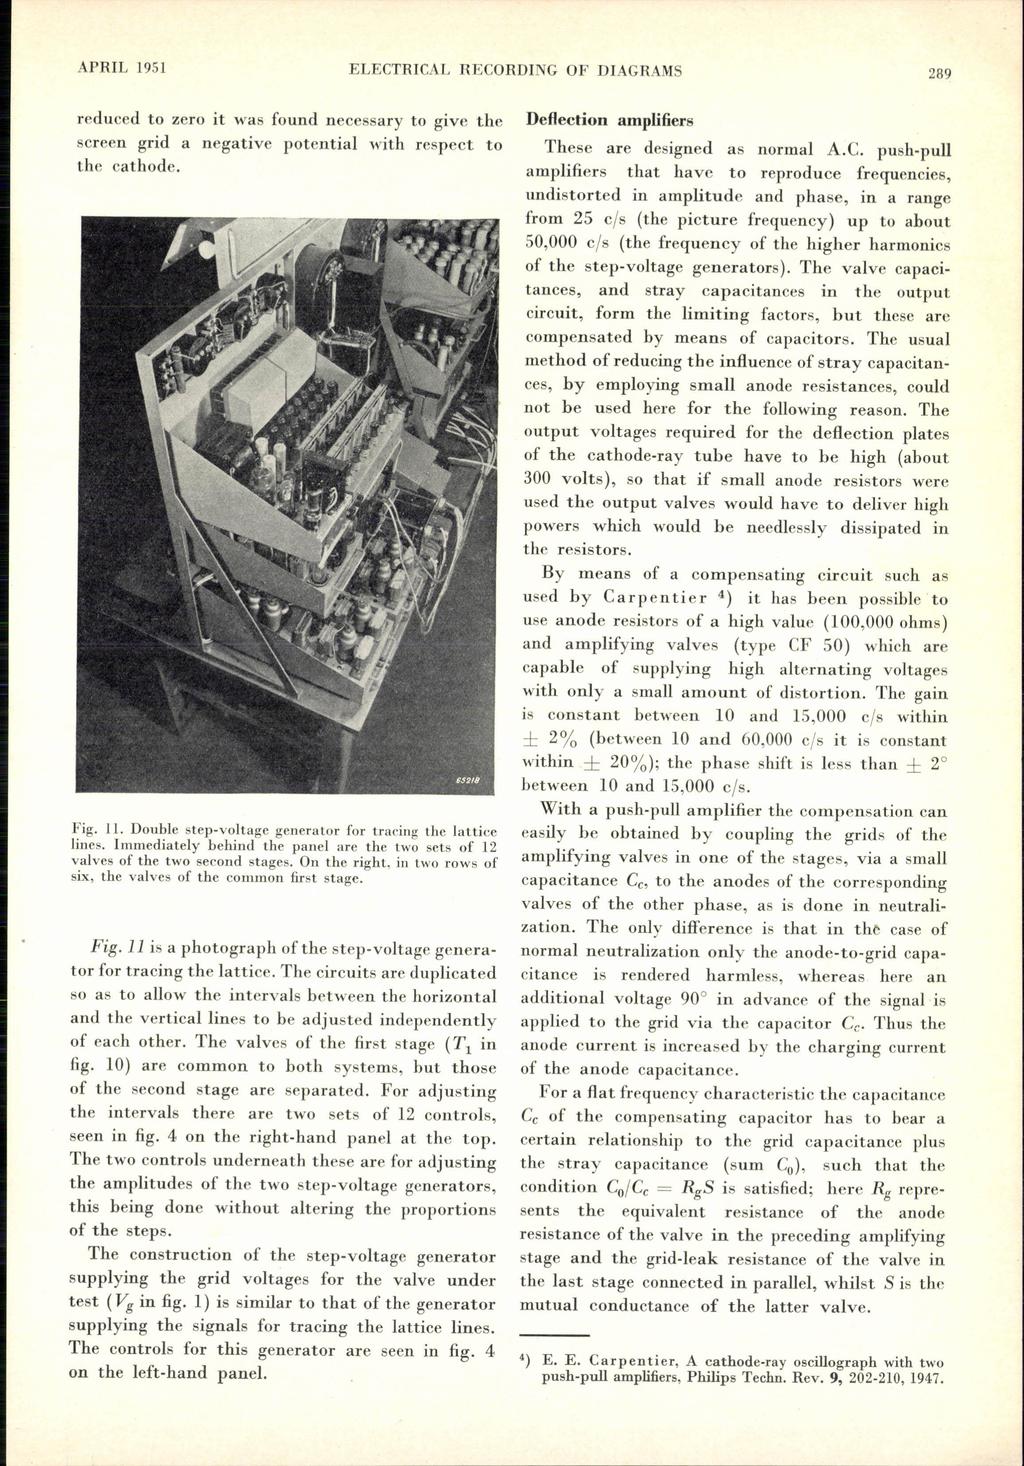 APRL 1951 ELECTRCAL RECORDNG OF DAGRAMS 289 reduced to zero it was found necessary to give the screen grid a negative potential with respect to the cathode. Fig. 11.